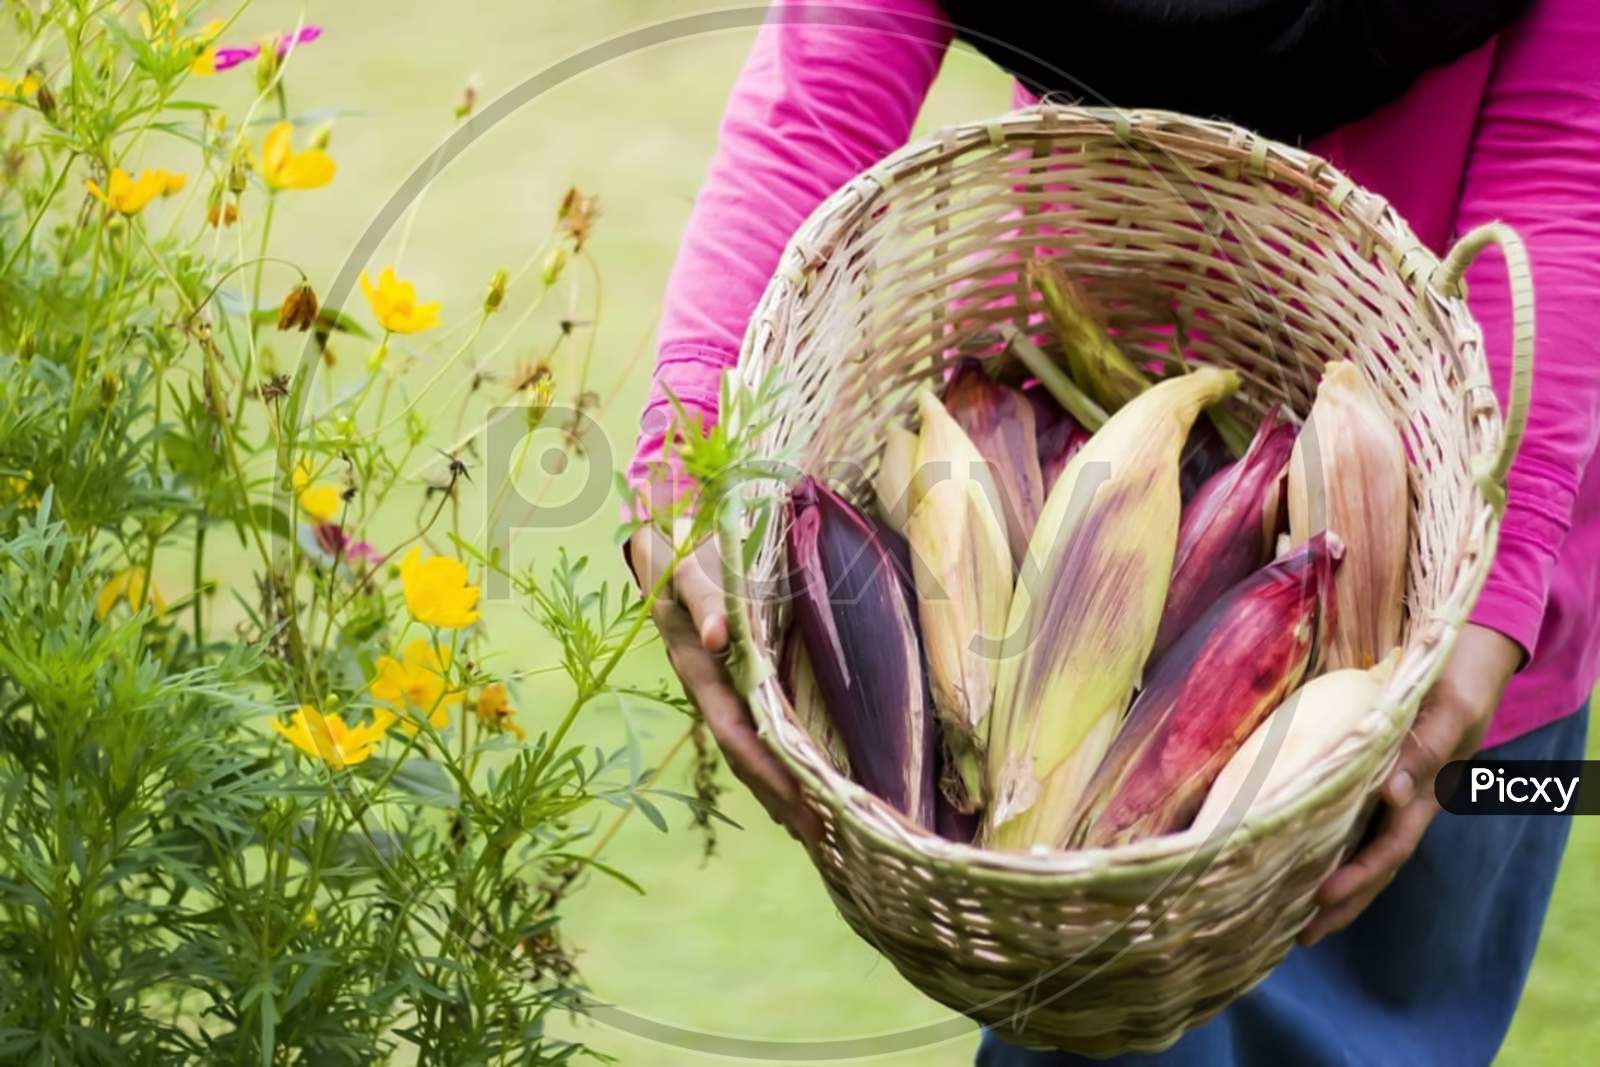 Flint Corn Is Named For Its Hard Kernels, Which Come In A Multitude Of Colors